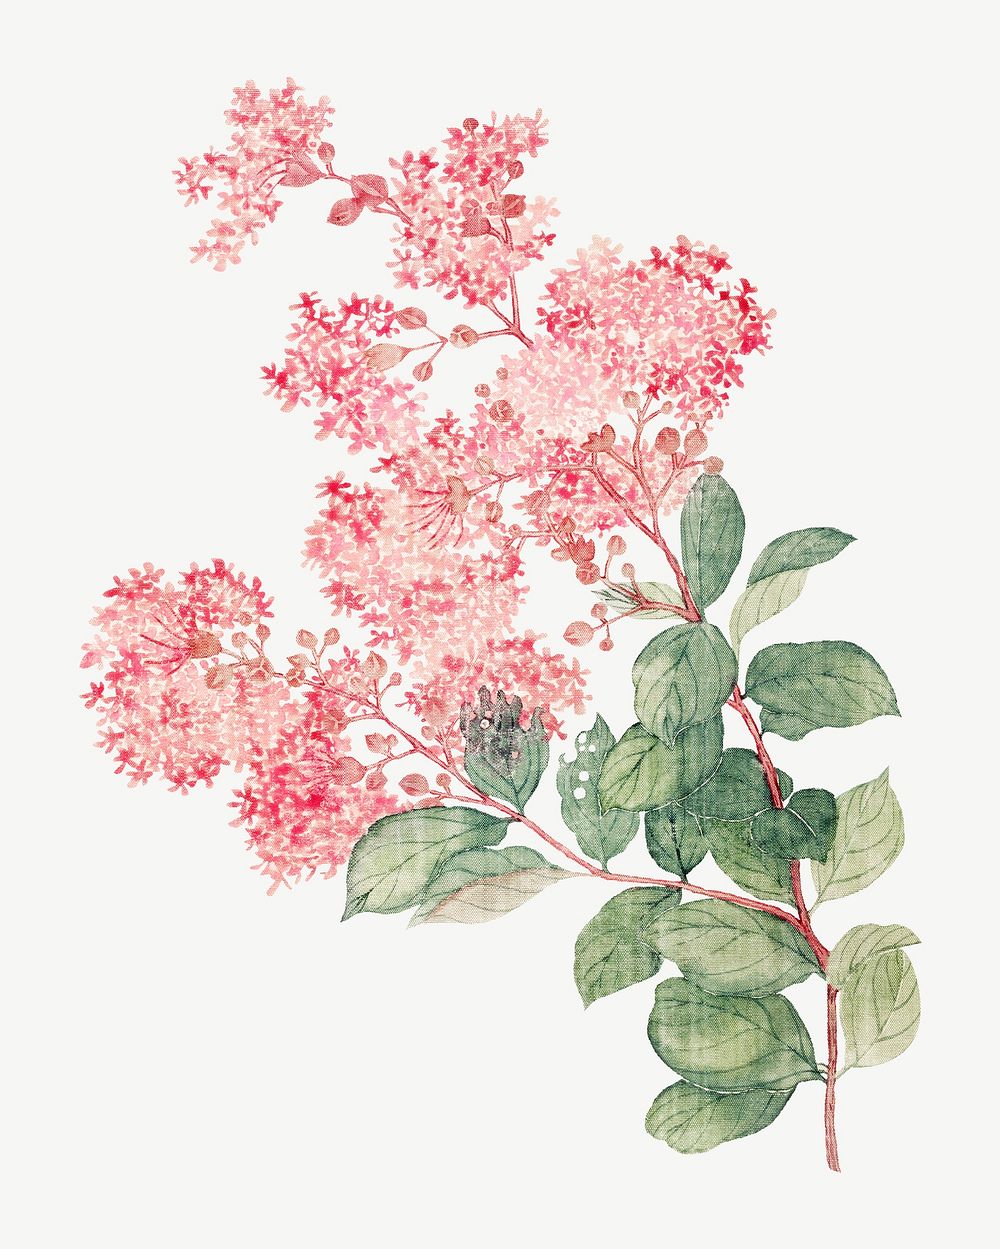 Hydrangea, vintage flower illustration by Ma Yuanyu psd. Remixed by rawpixel.